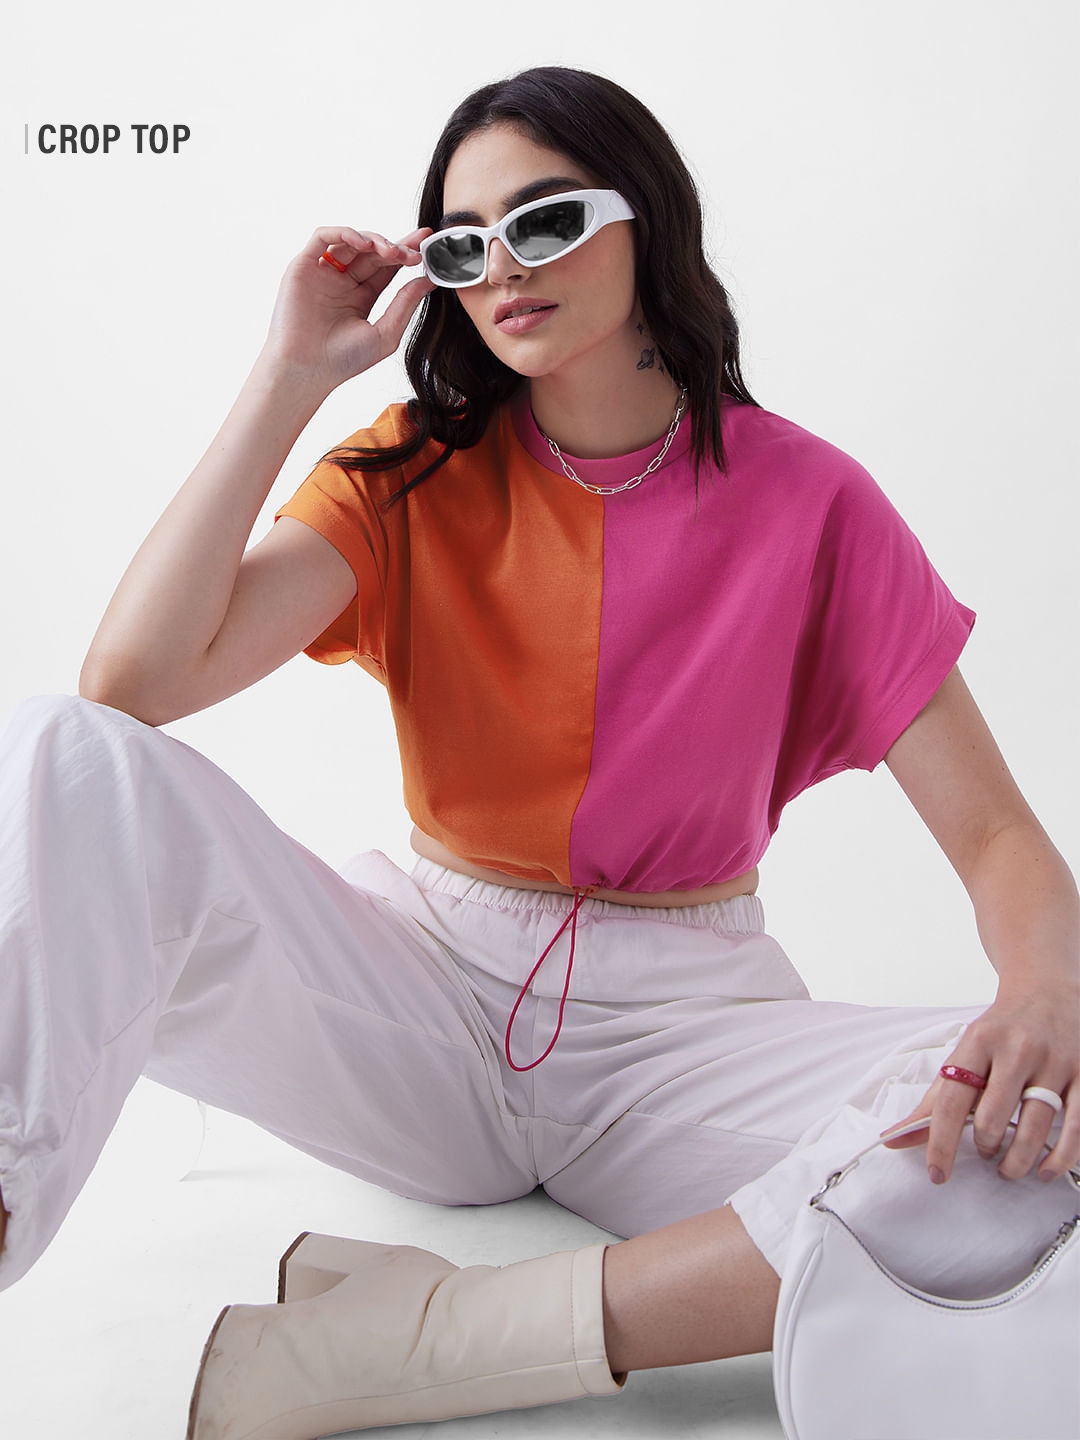 The Souled Store | Women's Solids: Blazing Orange, Hot Pink (Colourblock) Women's Cropped Tops